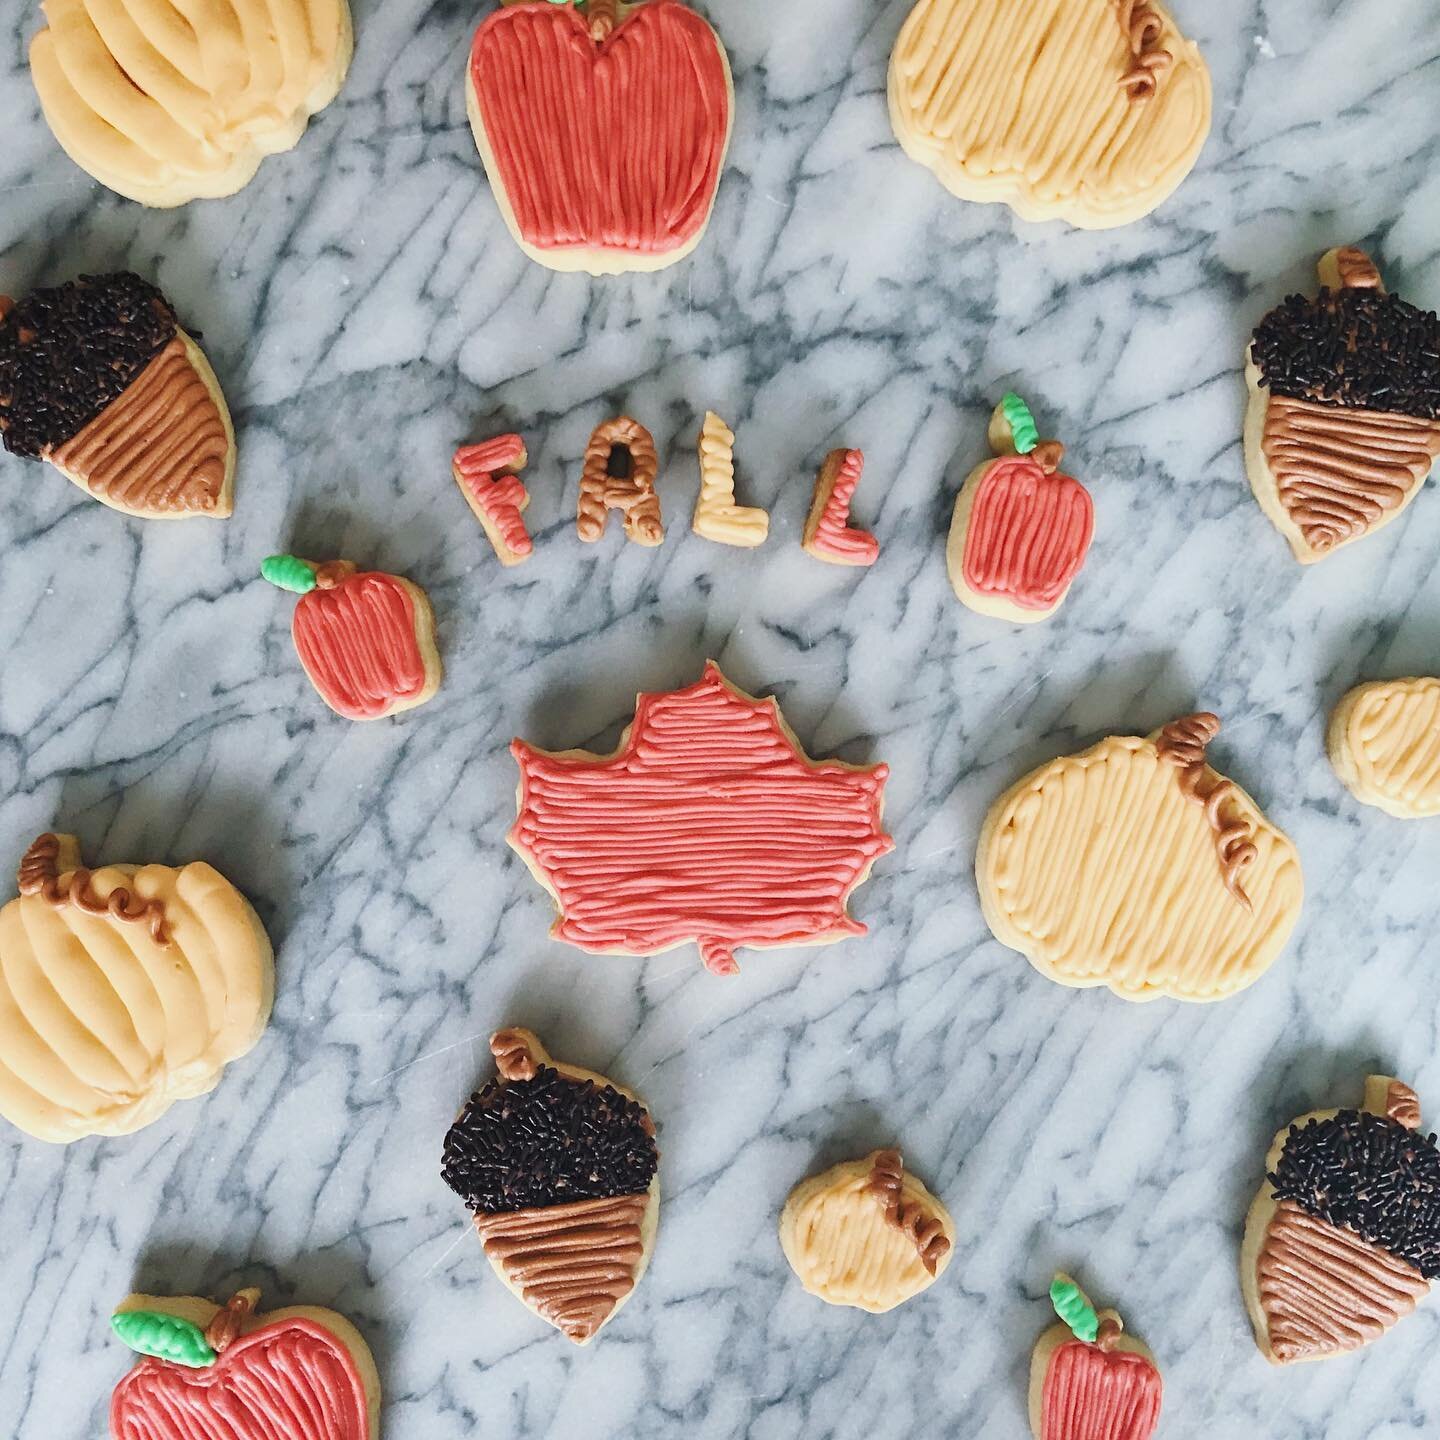 Happy Autumnal Equinox friends! Yep, it&rsquo;s my favorite time of year! I&rsquo;m looking forward to apple picking, pumpkin patch visits, all the baking, and of course Fall and Halloween cookies! What are your Fall faves?🍂👇🏻